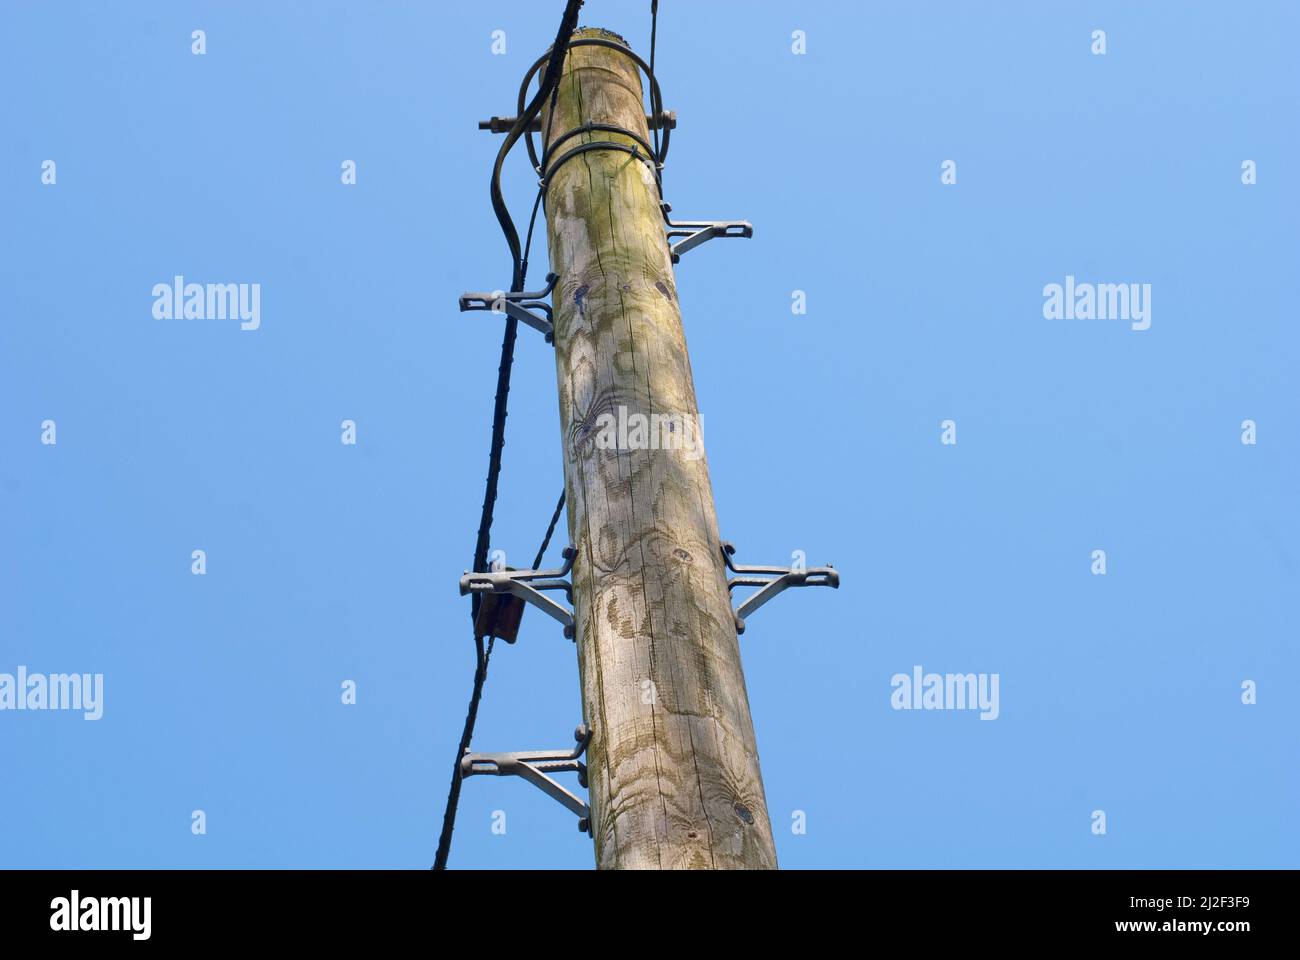 Telegraph pole steps and (copper cable) infrastructure. Stock Photo